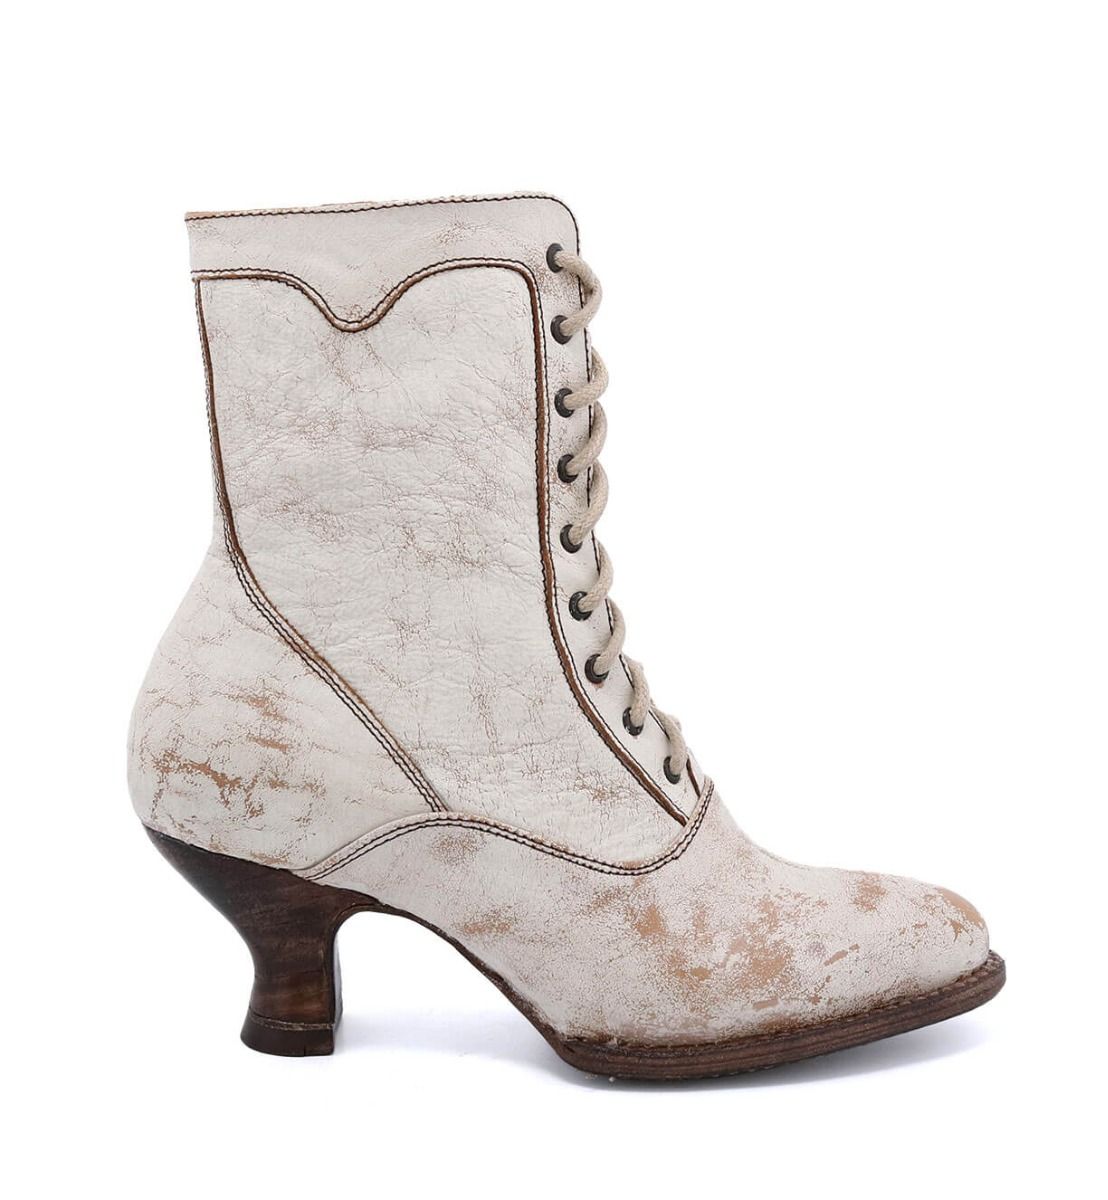 Victorian Inspired Leather Ankle Boots in Nectar Lux